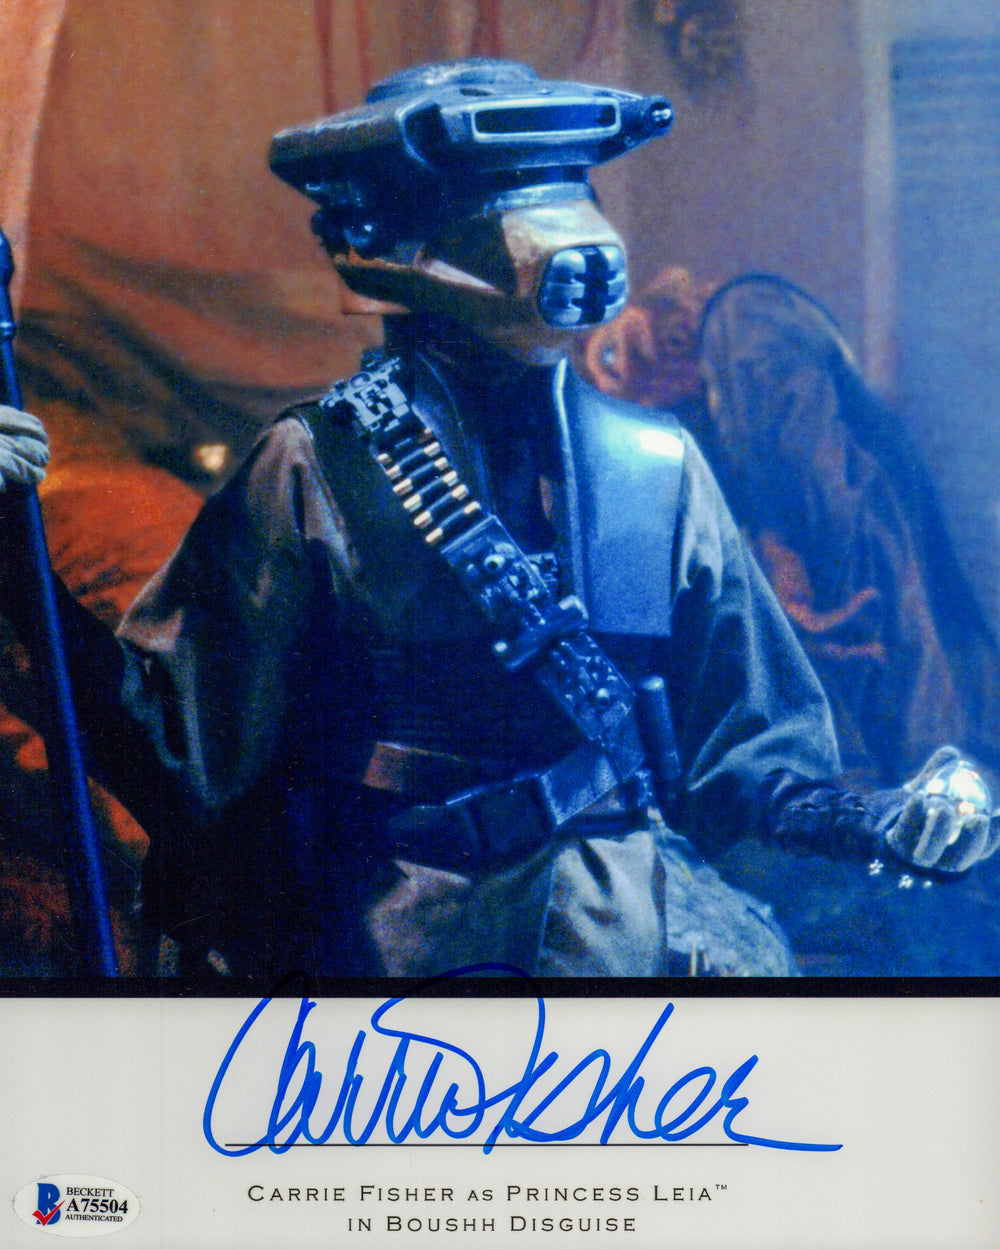 Carrie Fisher as Princess Leia in Boushh Disguise in Star Wars: Return of the Jedi Signed 8x10 Photo